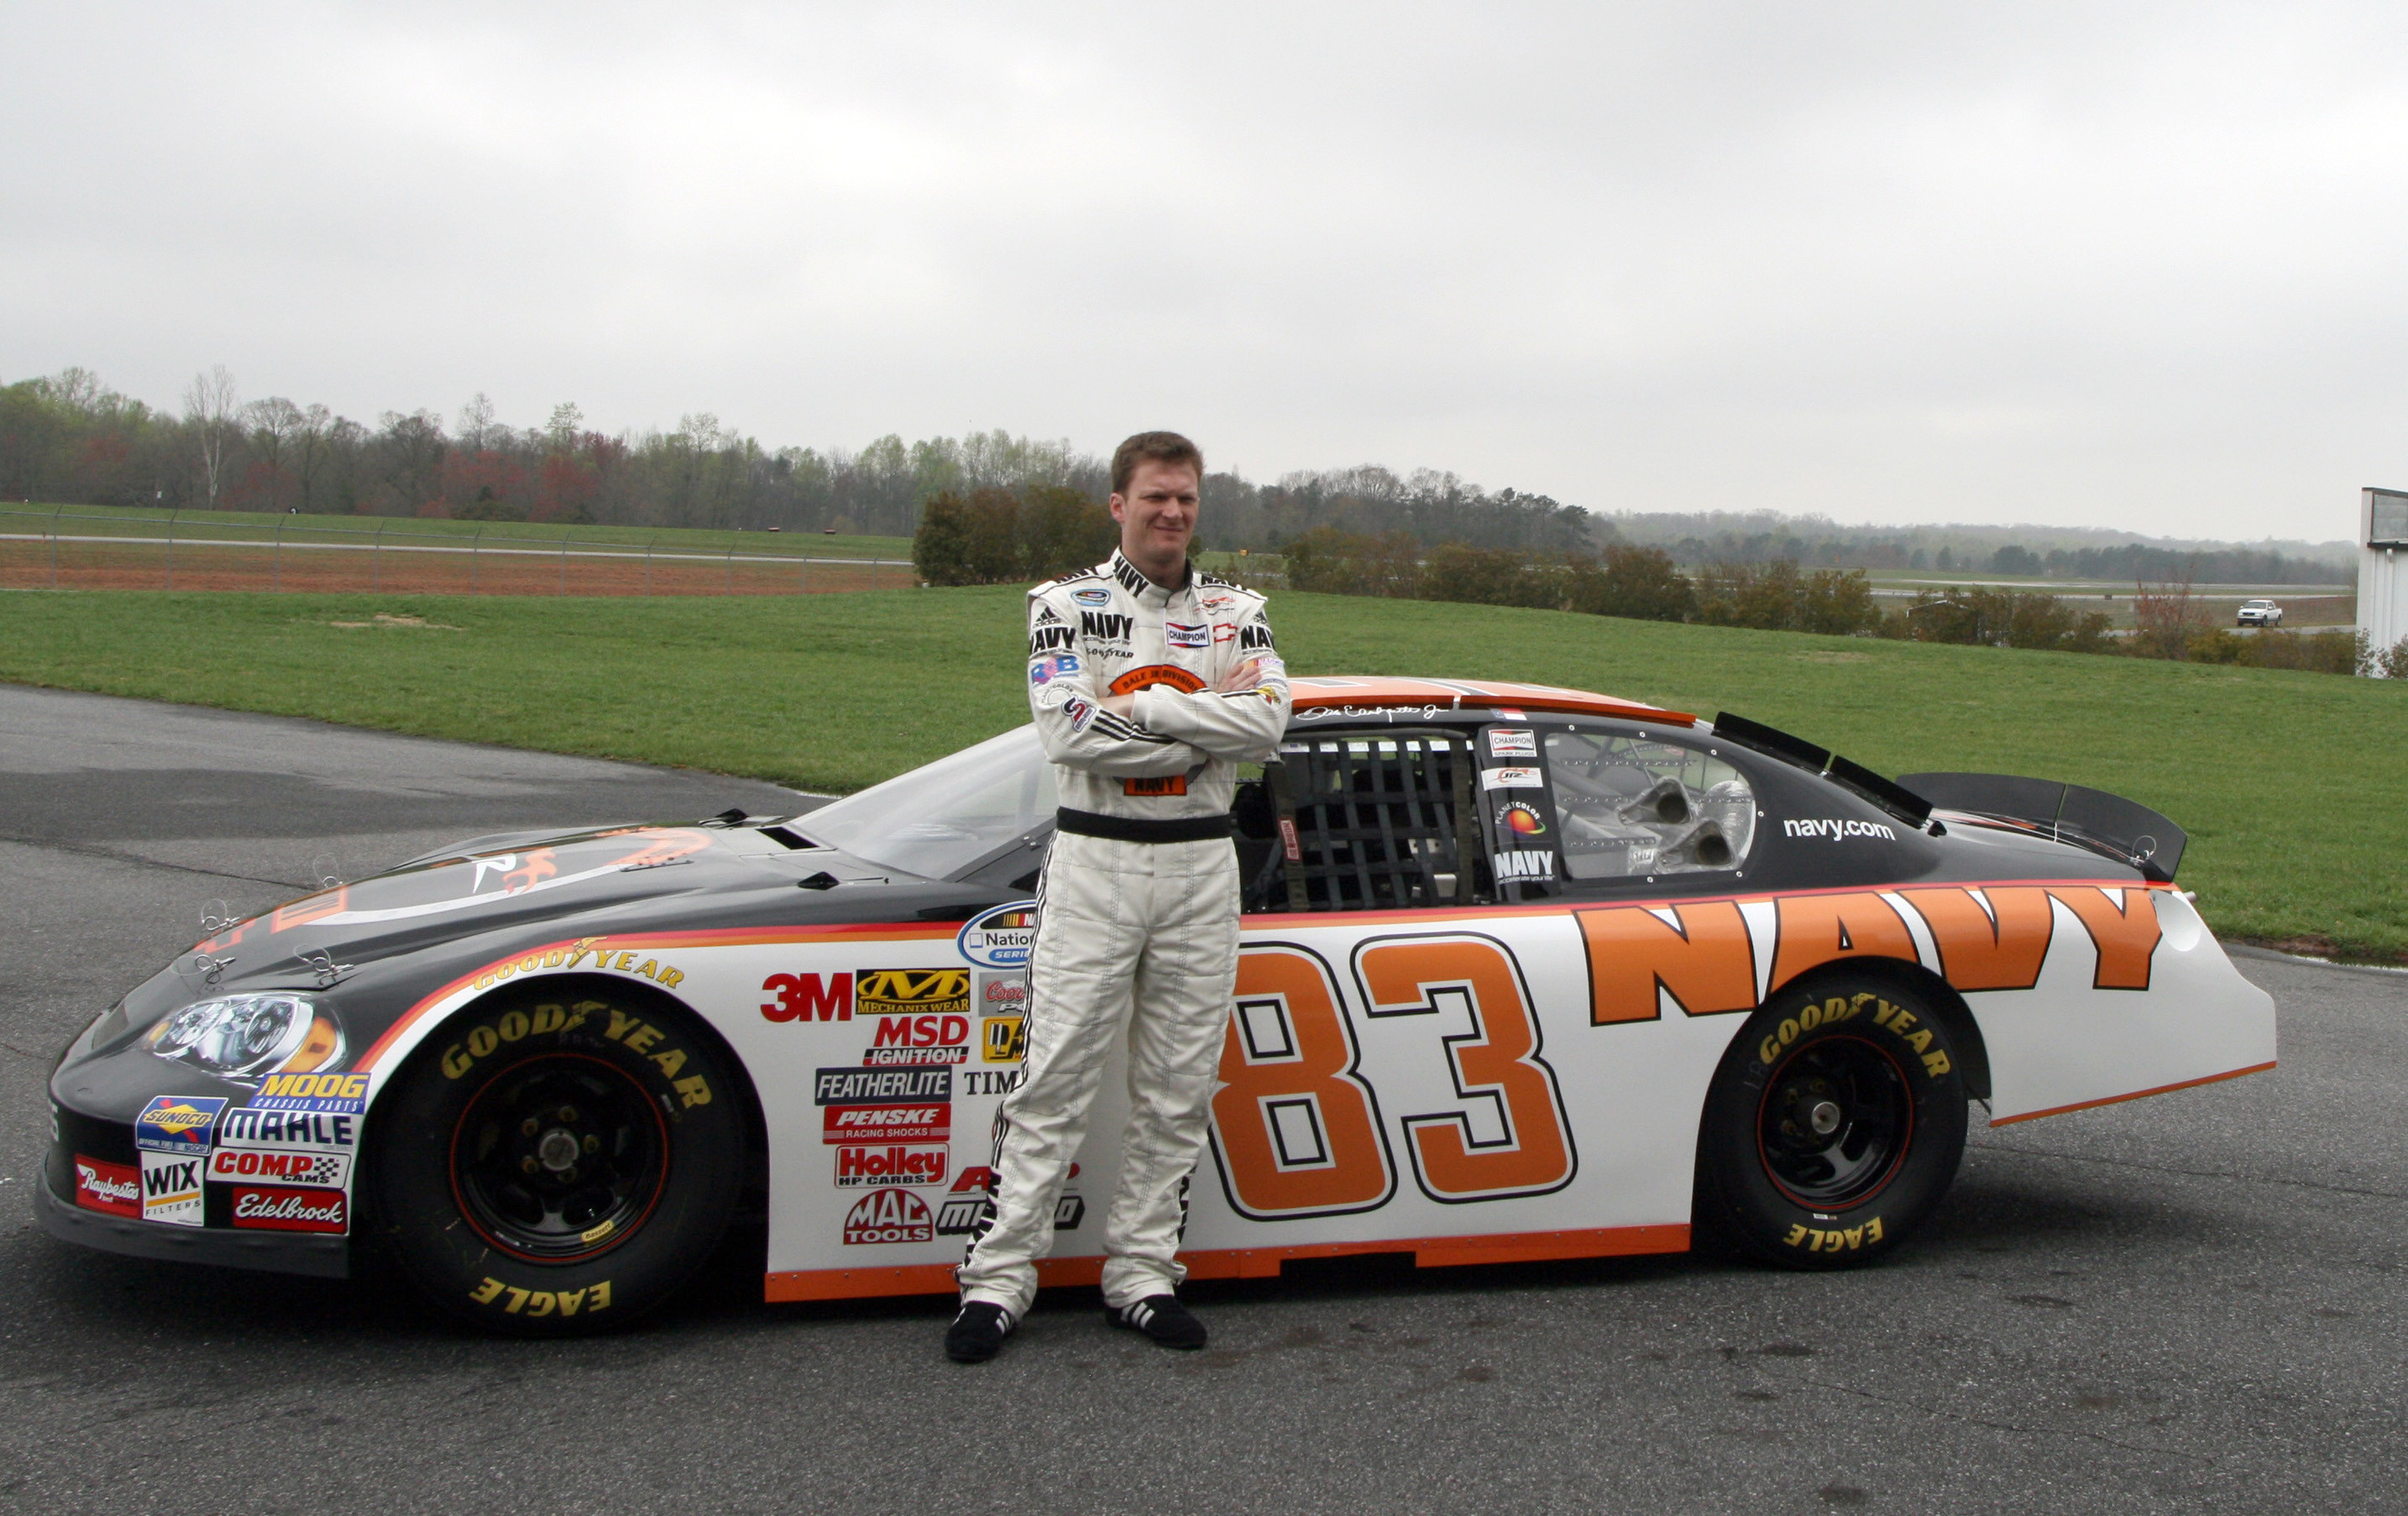 File:Dale Earnhardt Jr with Nationwide Series No 83 car.jpg